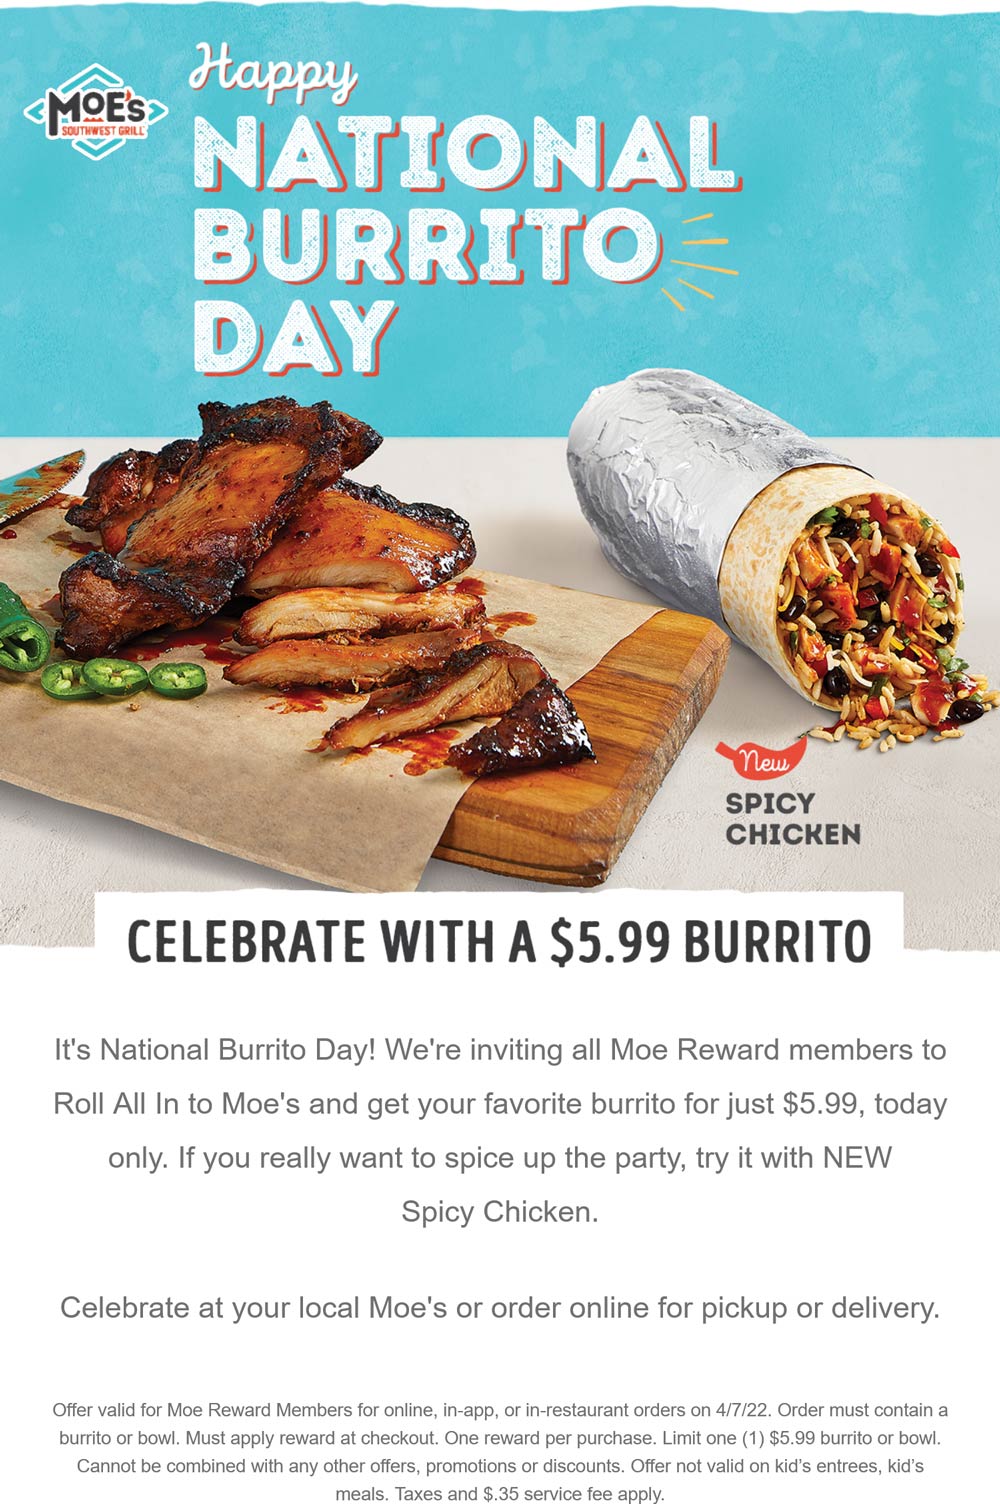 Moes Southwest Grill restaurants Coupon  $6 burrito today at Moes Southwest Grill restaurants #moessouthwestgrill 